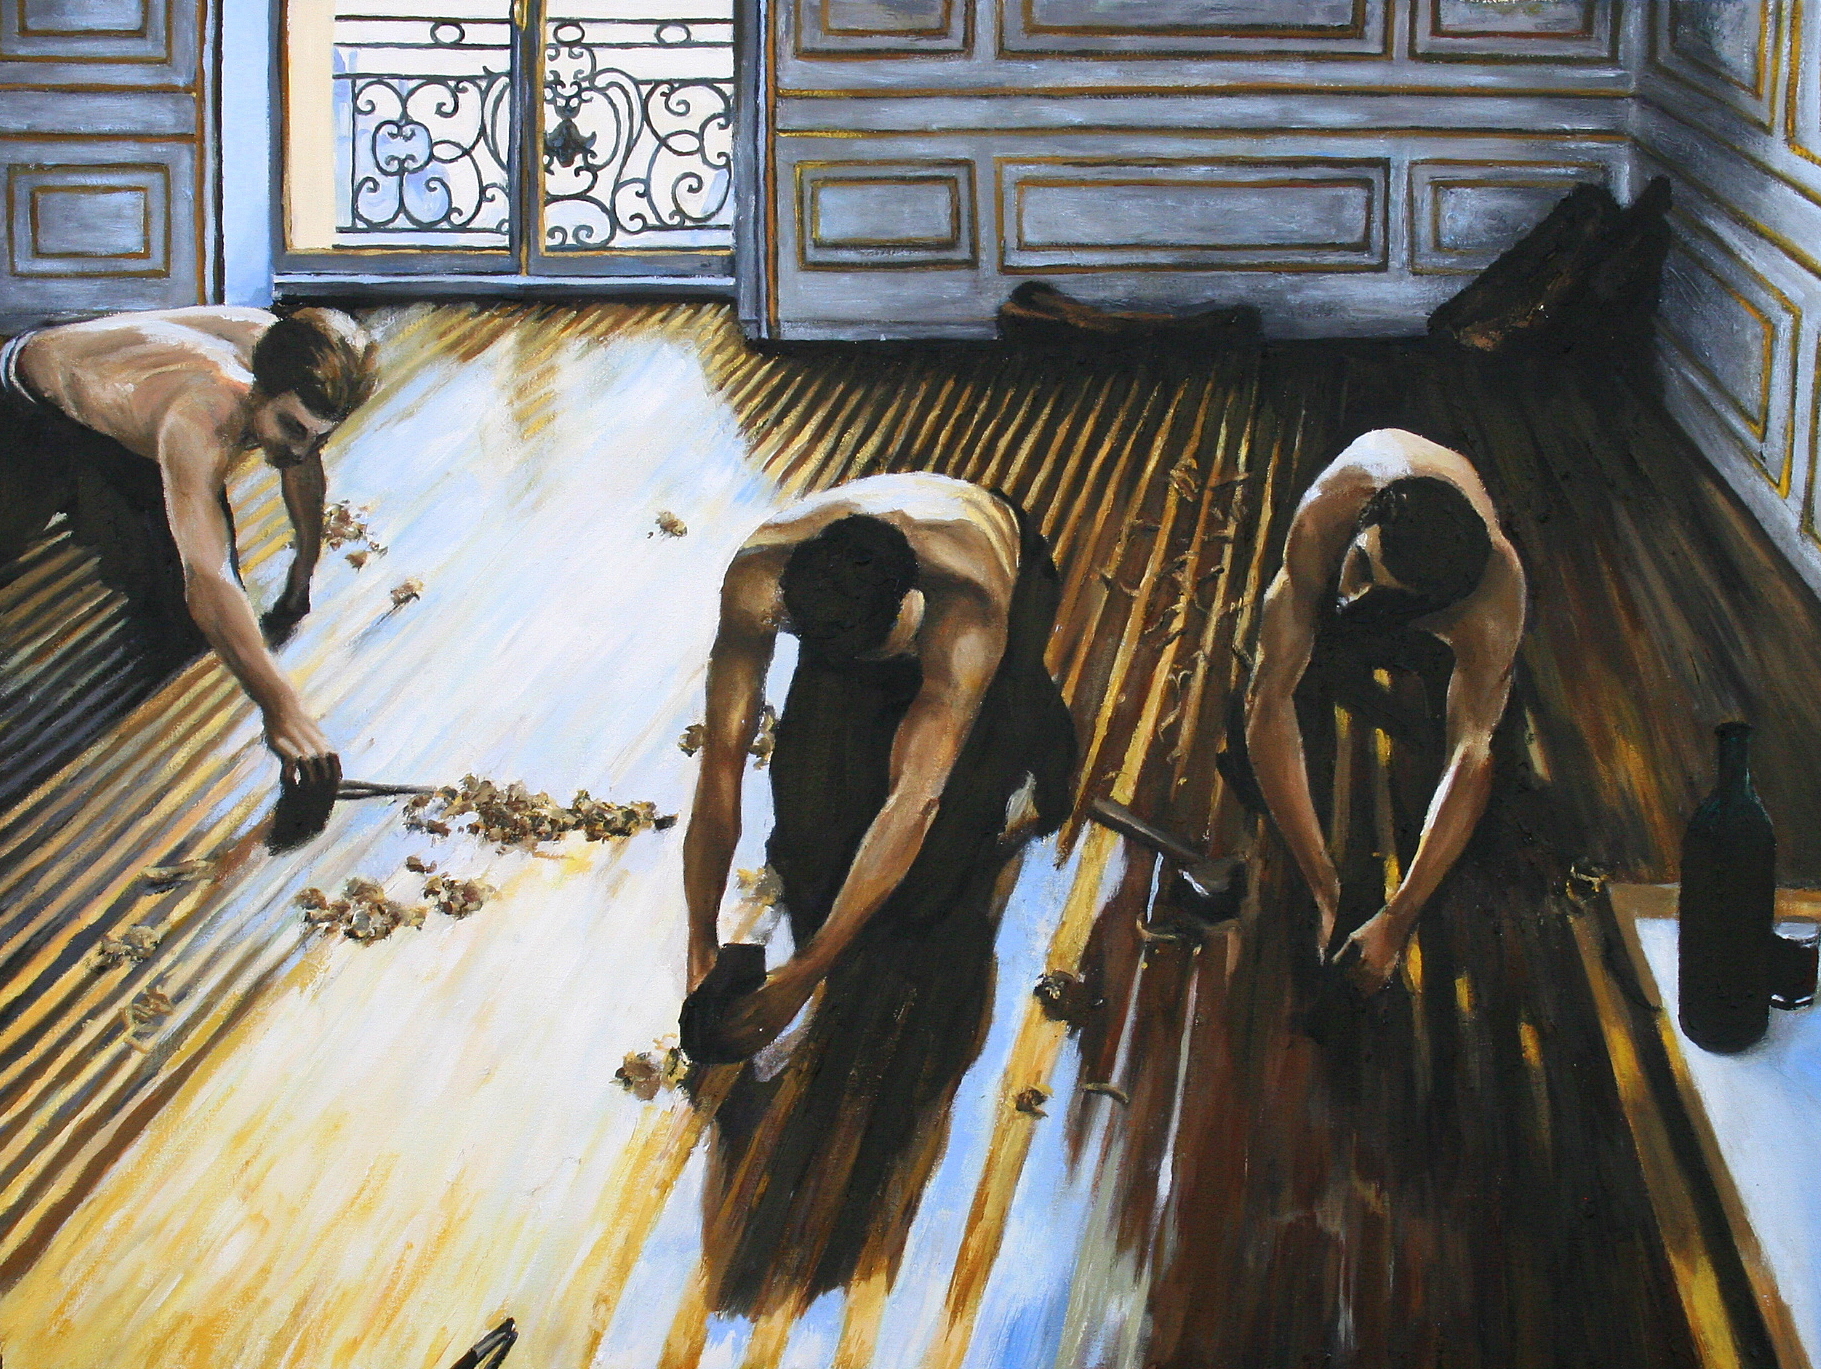 Gustave Caillebotte Reproduction, Floor Scrapers, oil on canvas, 24x36 in, Jessica Siemens 2010